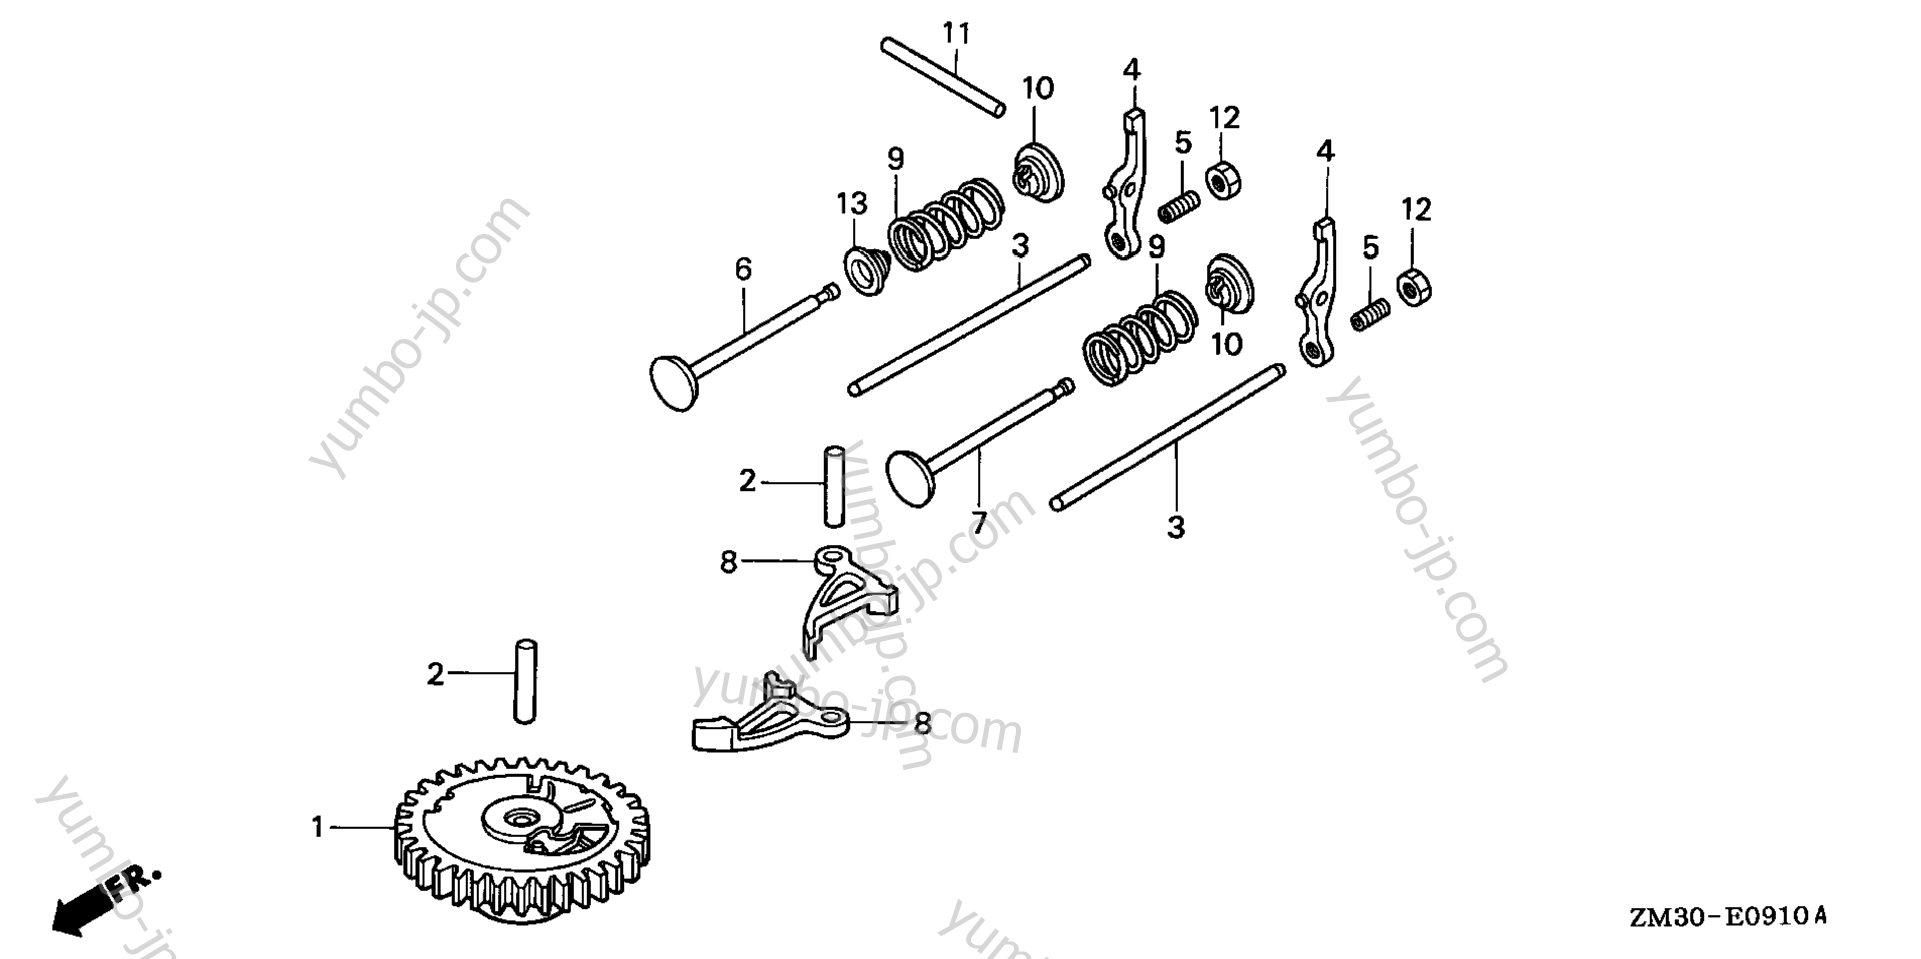 CAMSHAFT (VERTICAL TYPE) for multi purpose engines HONDA GX31 SCMS/A 